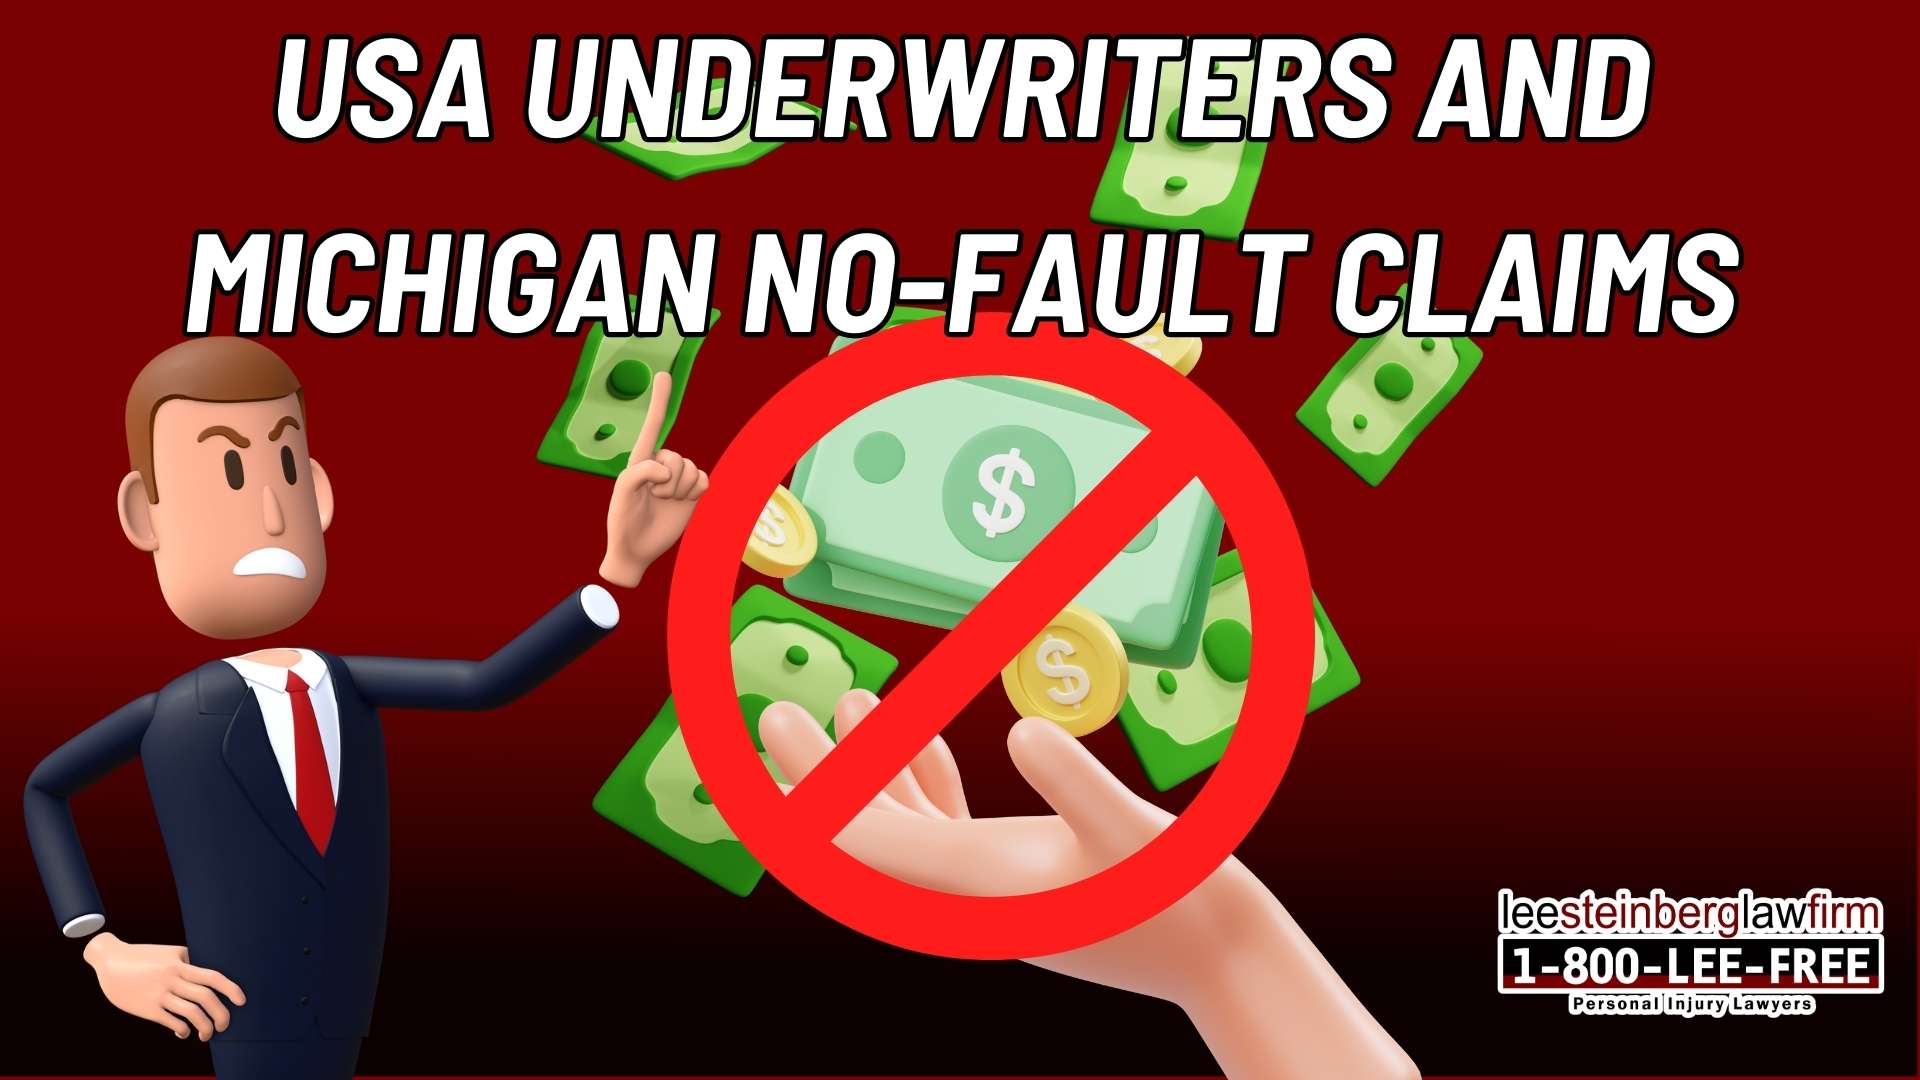 USA Underwriters and Michigan No-Fault Claims